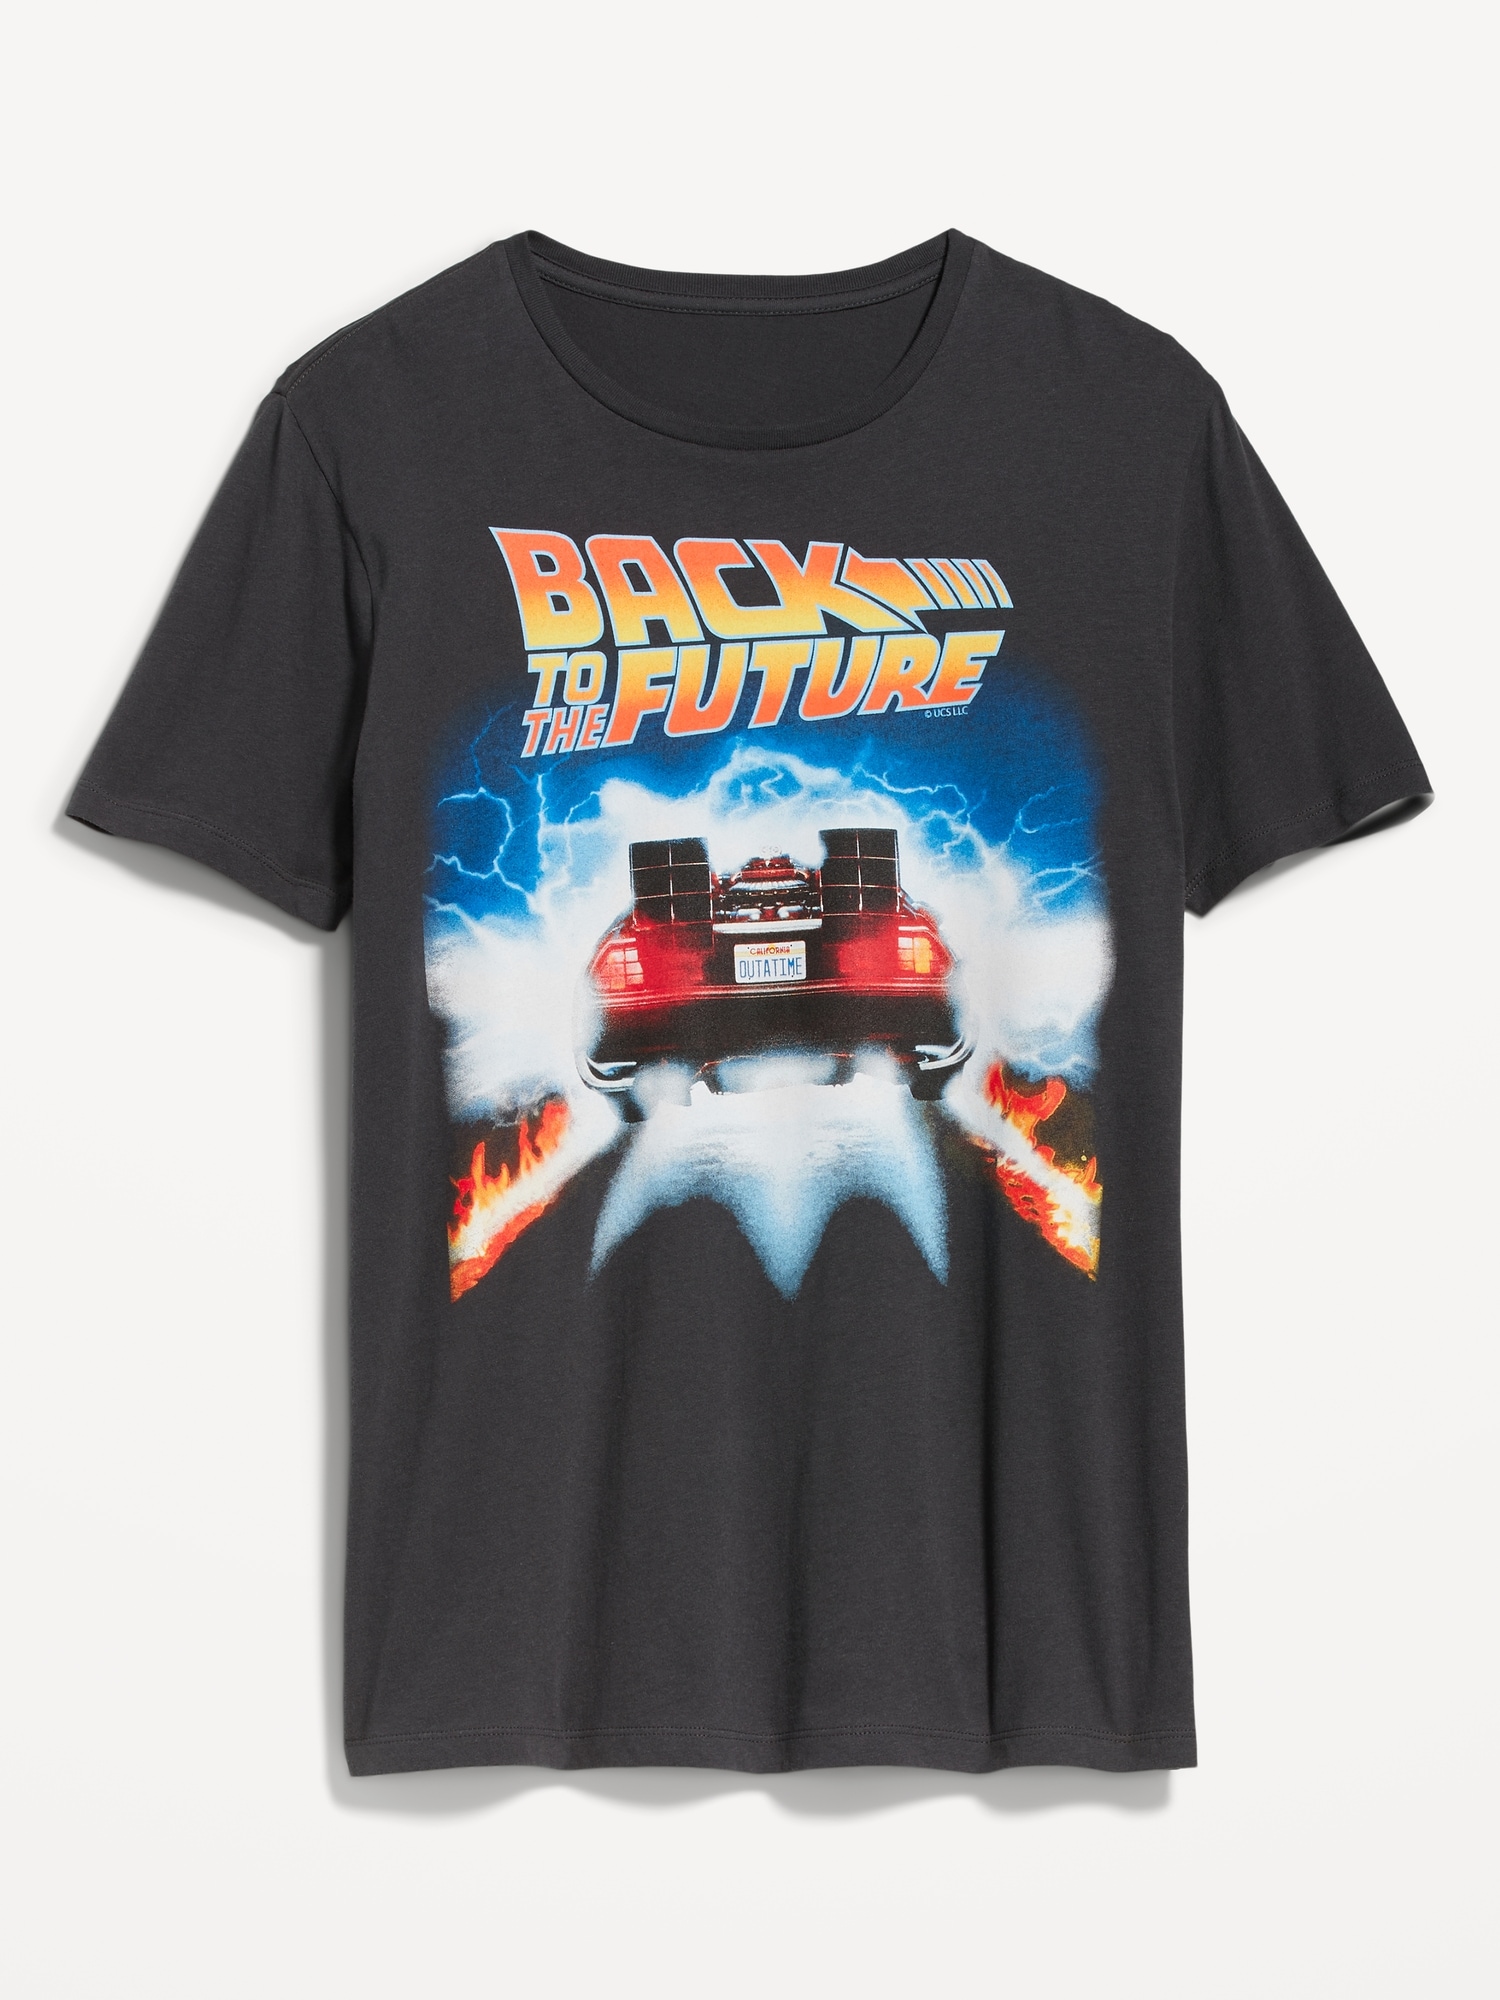 Back To The Future Gender-Neutral Graphic T-Shirt for Adults